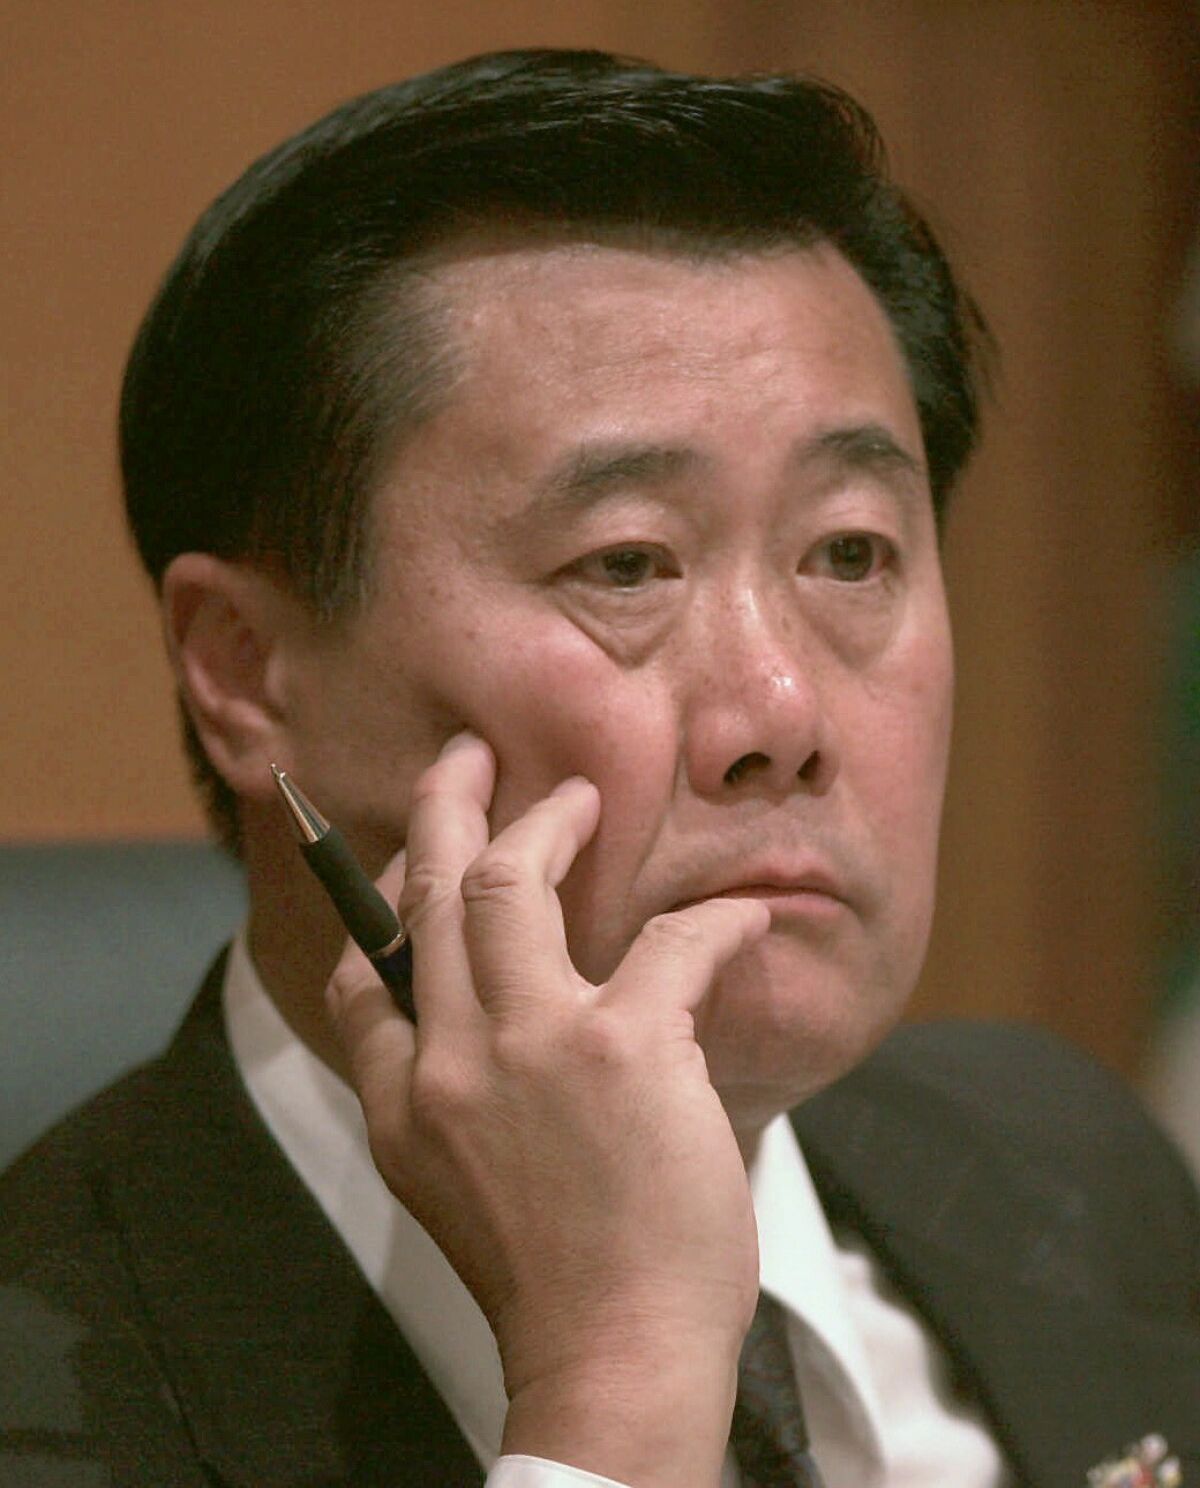 State Sen. Leland Yee (D-San Francisco) had alerted officers that he'd received a death threat for pushing a bill that would restrict assault weapons. Above, Yee in 2001.